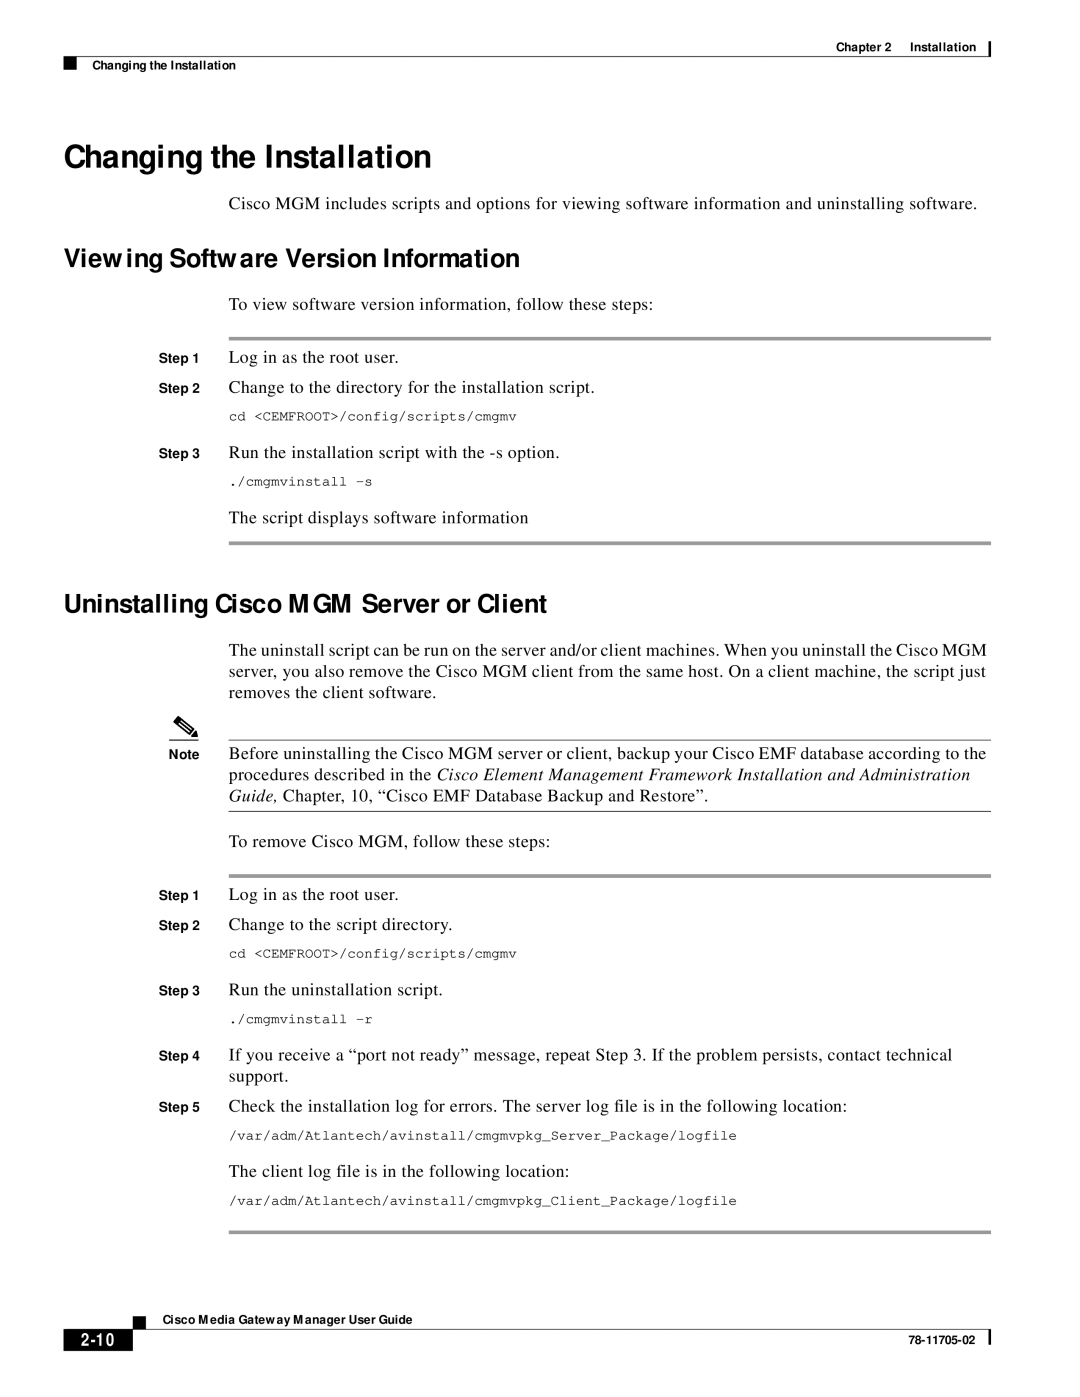 Cisco Systems MGX 8000 manual Changing the Installation, Viewing Software Version Information, 2-10 